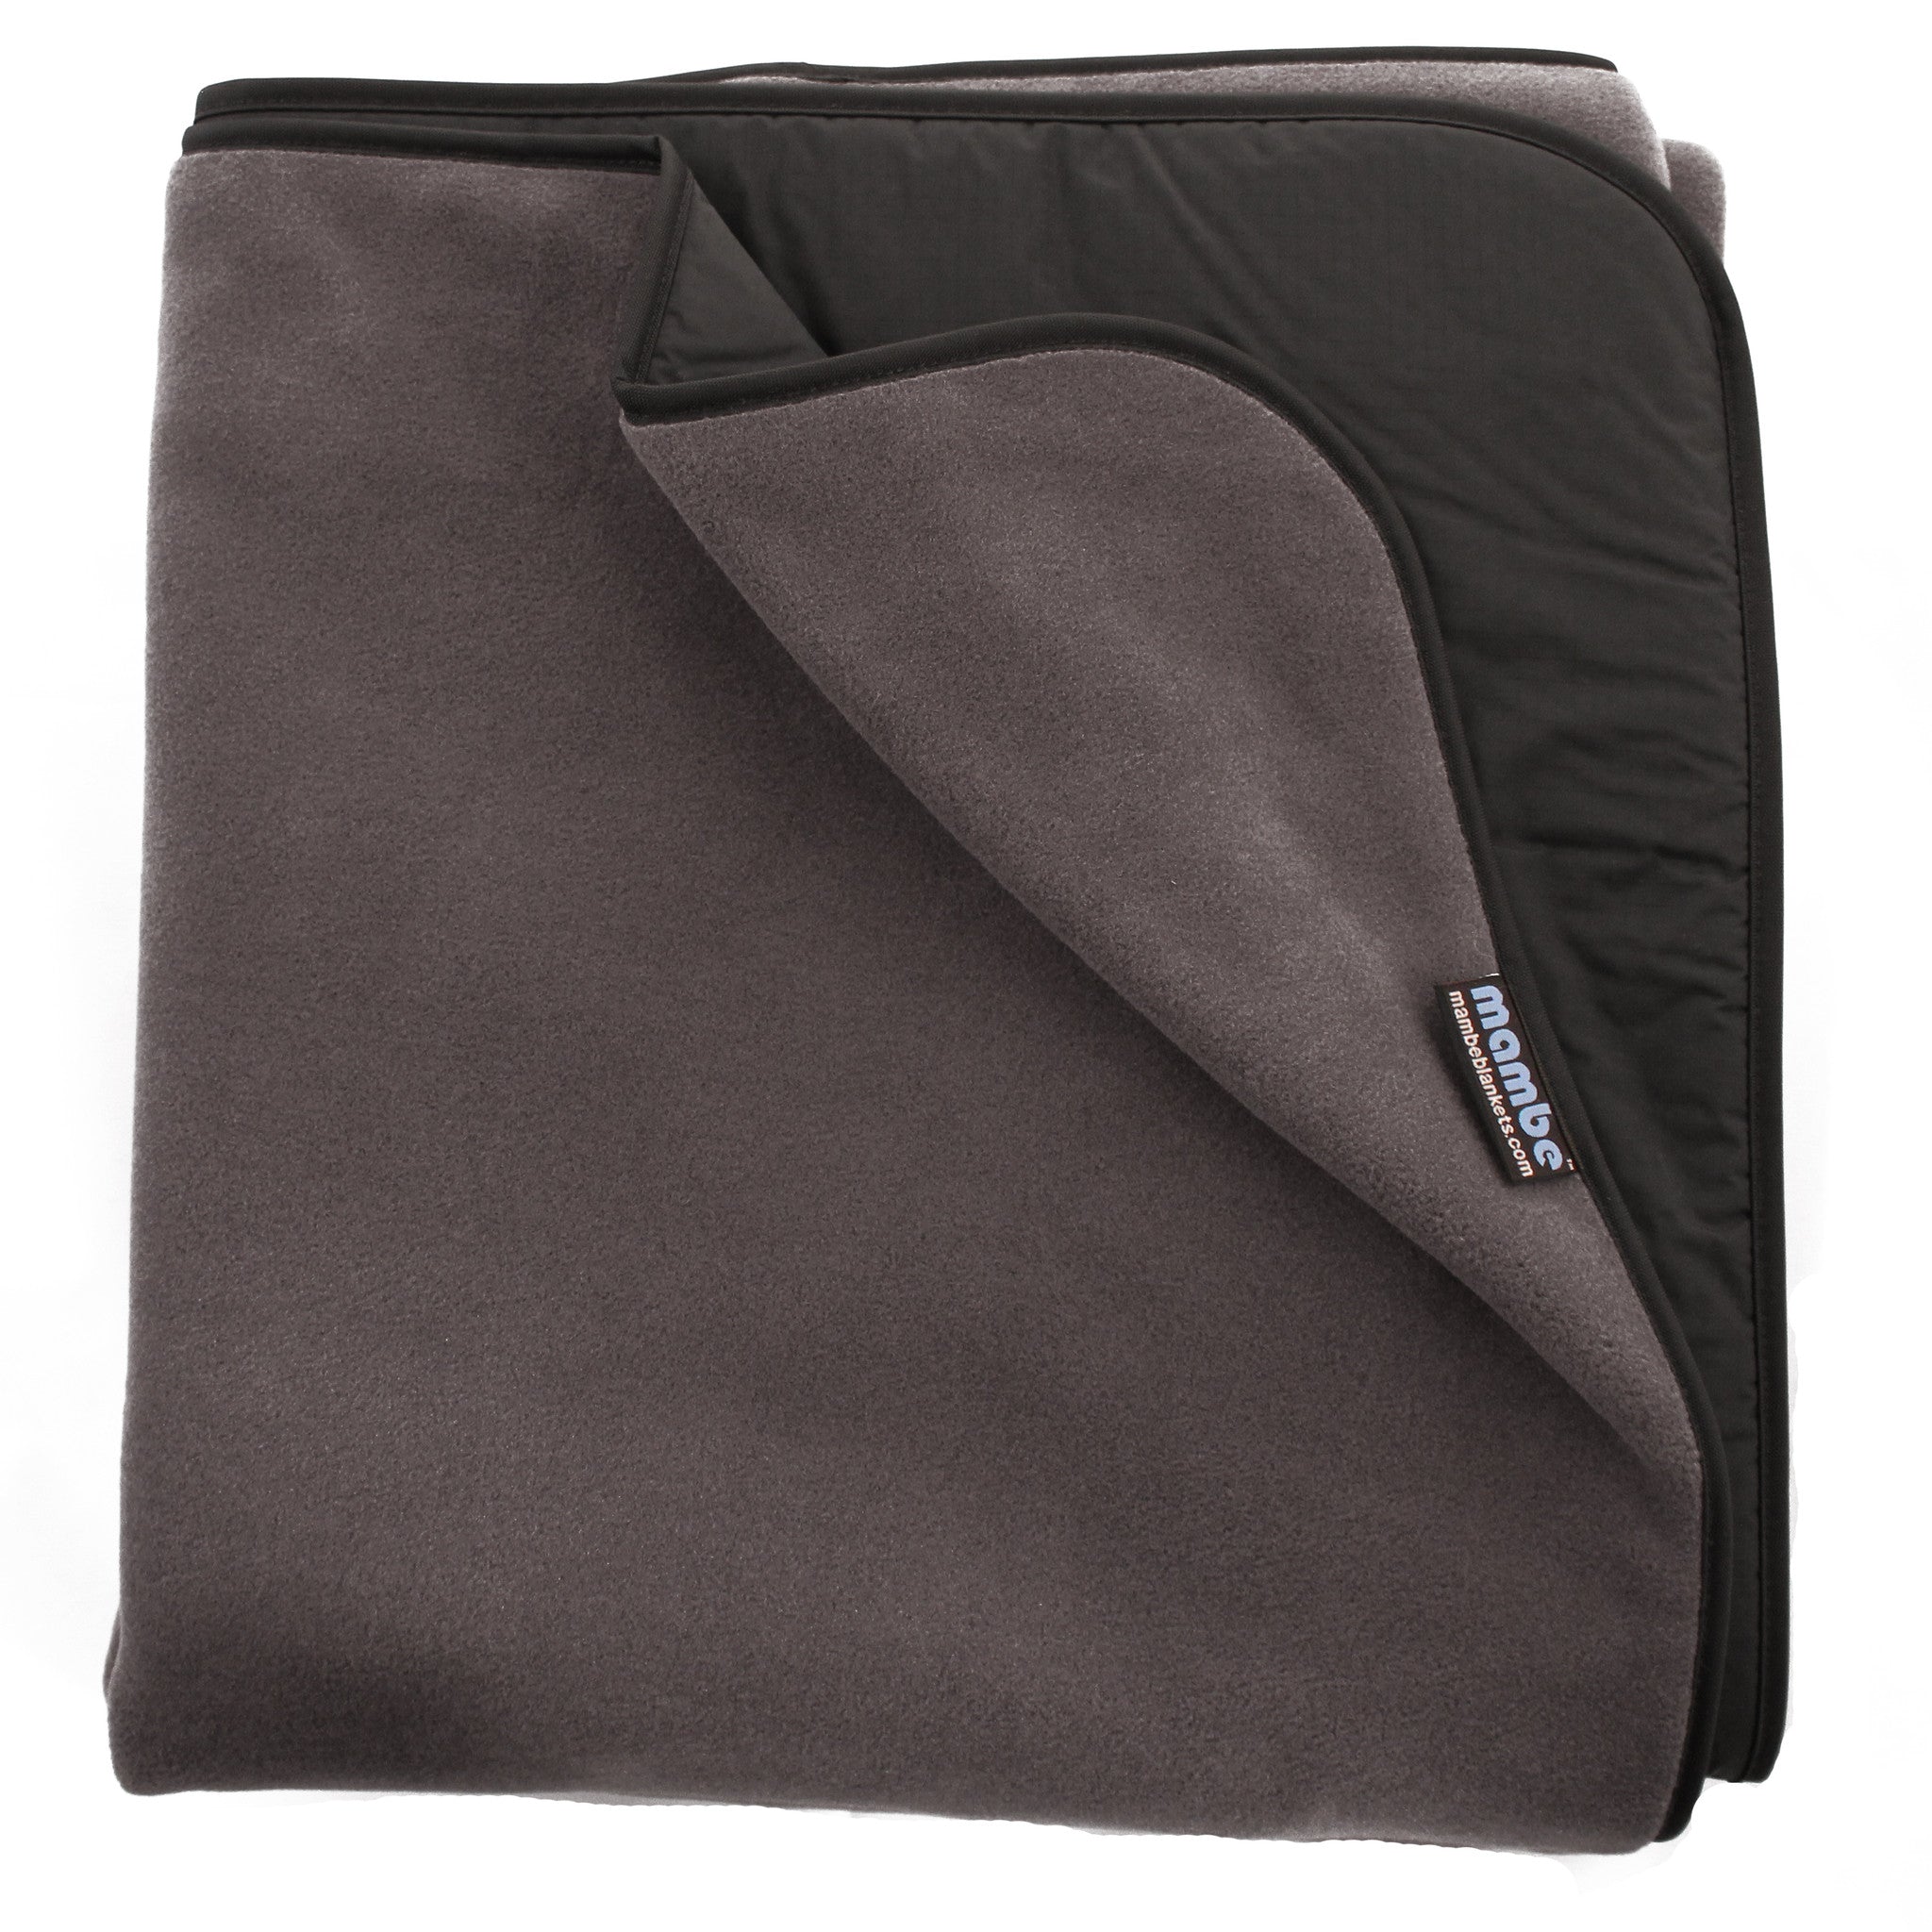 Charcoal Grey Mambe Extreme Weather Outdoor Blanket for cold weather and stadium use.